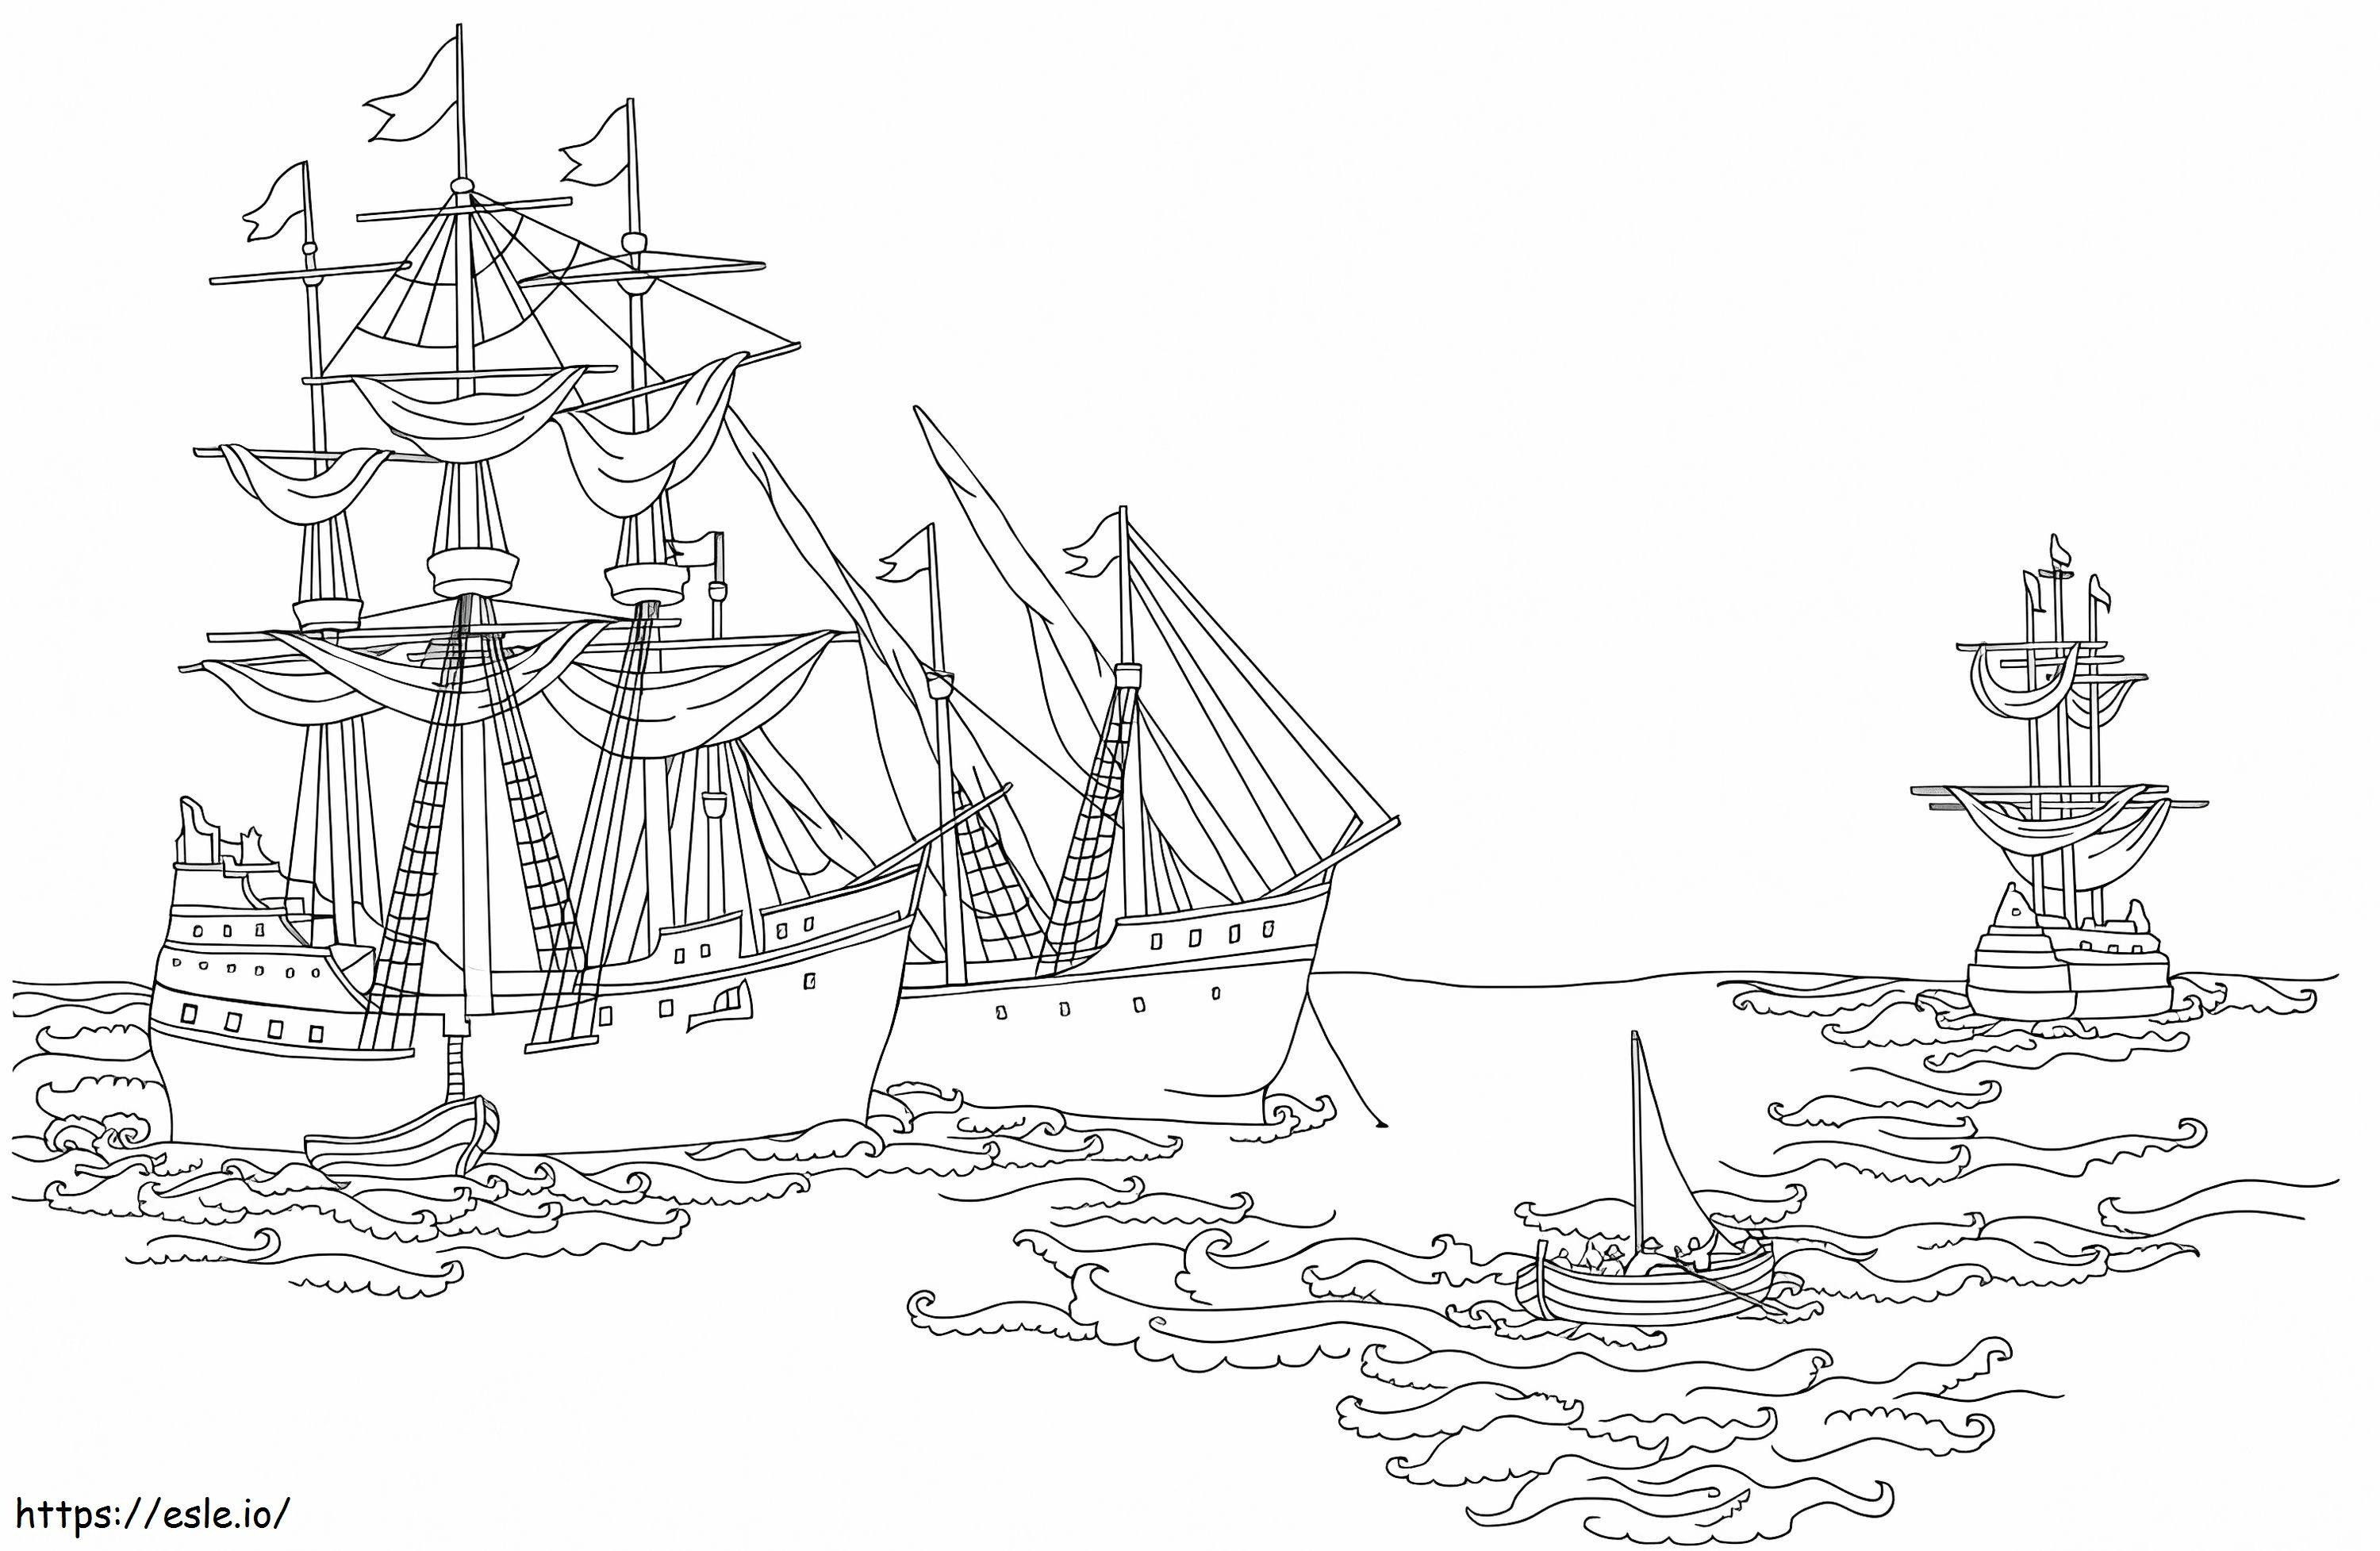 1559873918 Columbuss Ships A4 coloring page